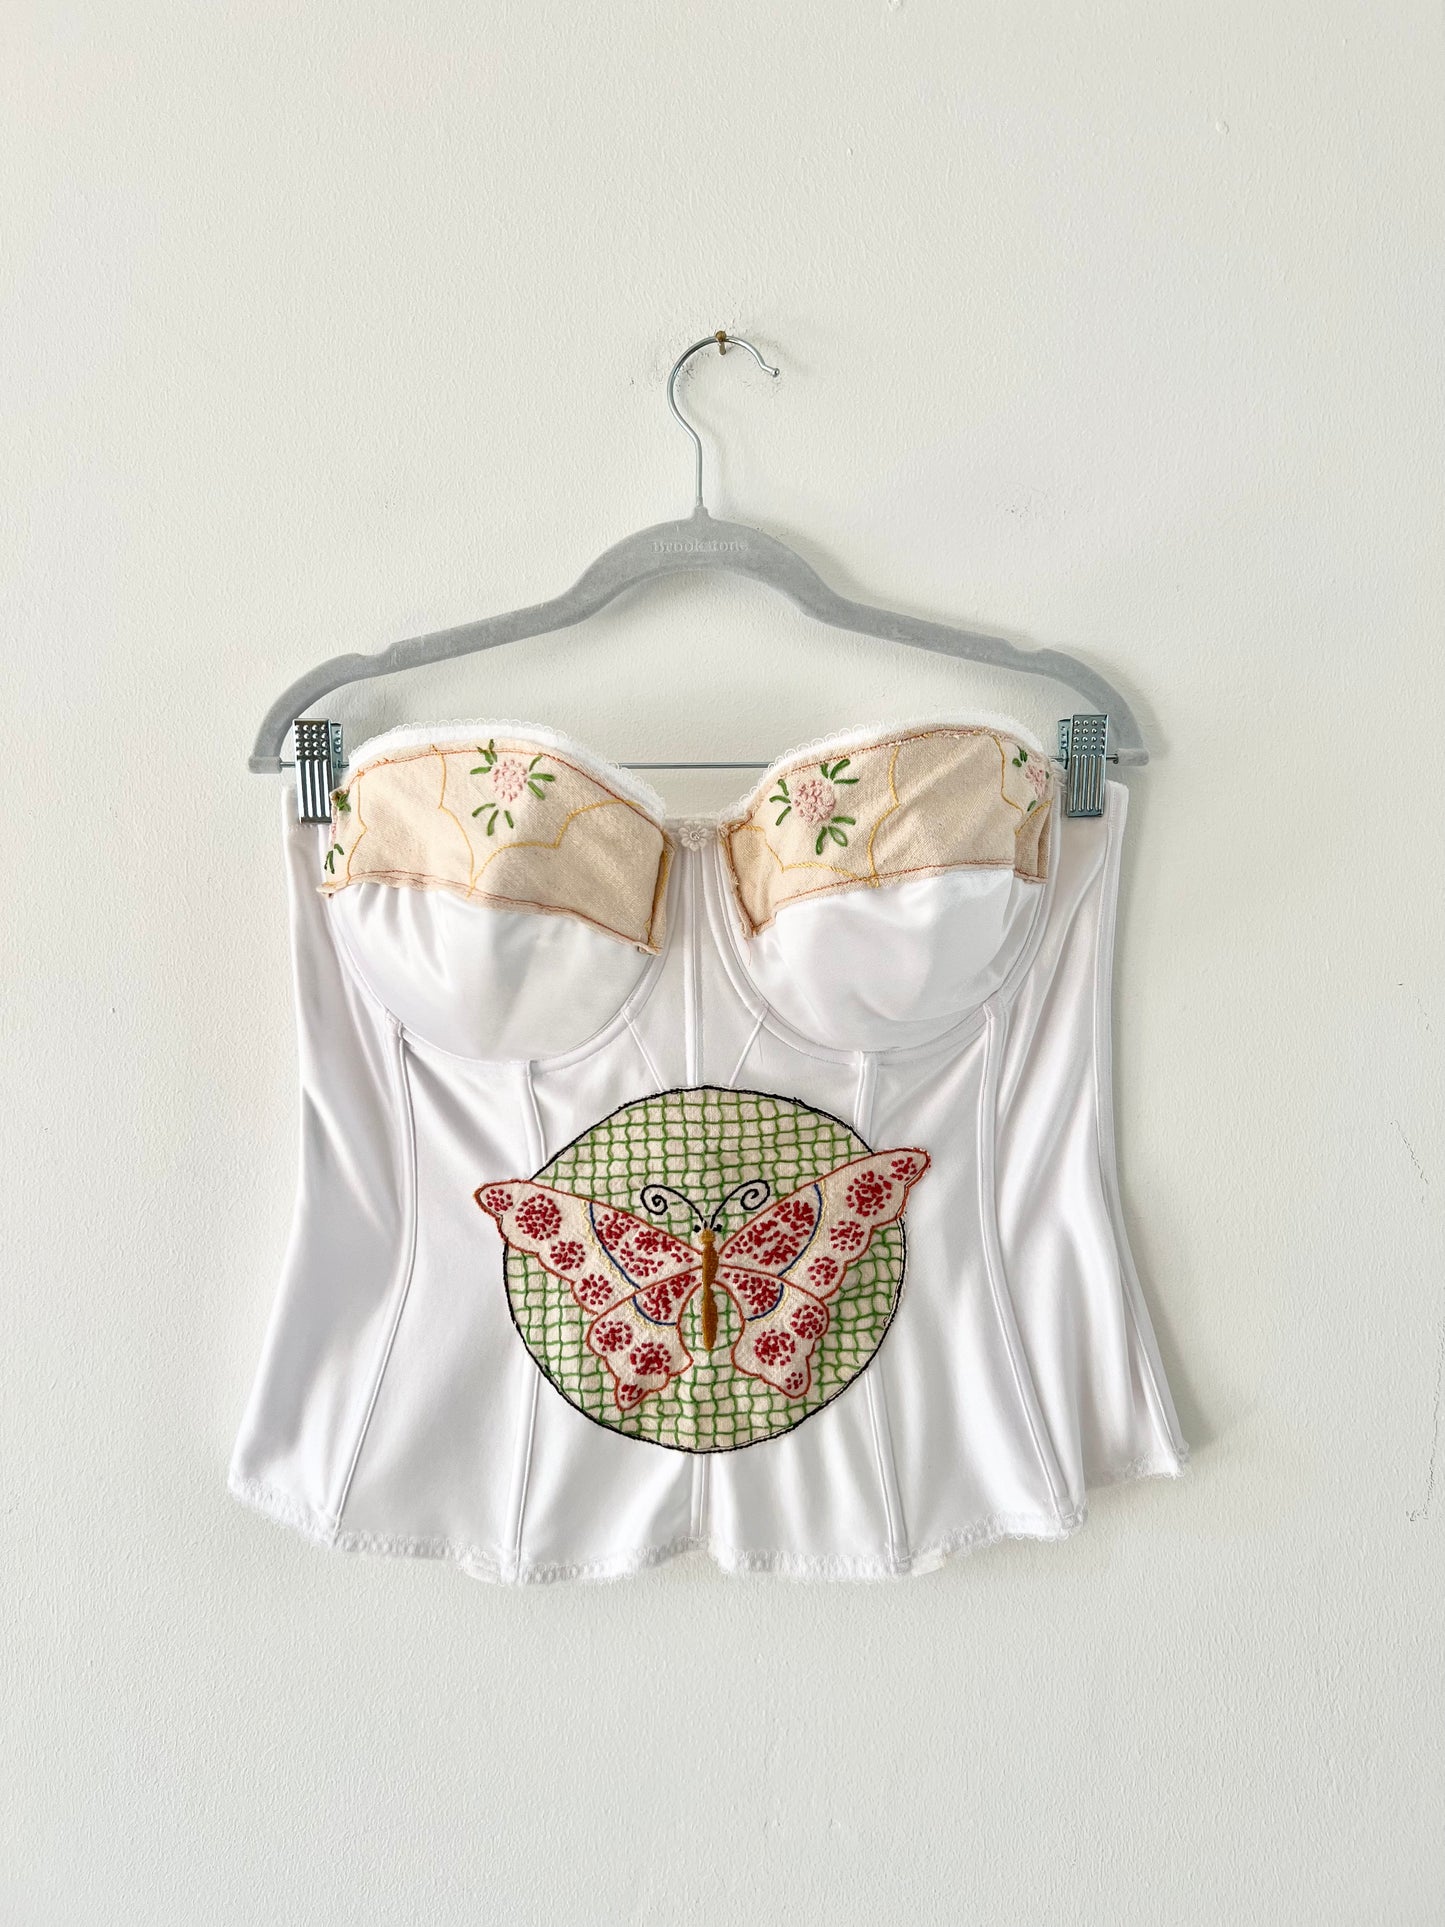 The Doily Bustier